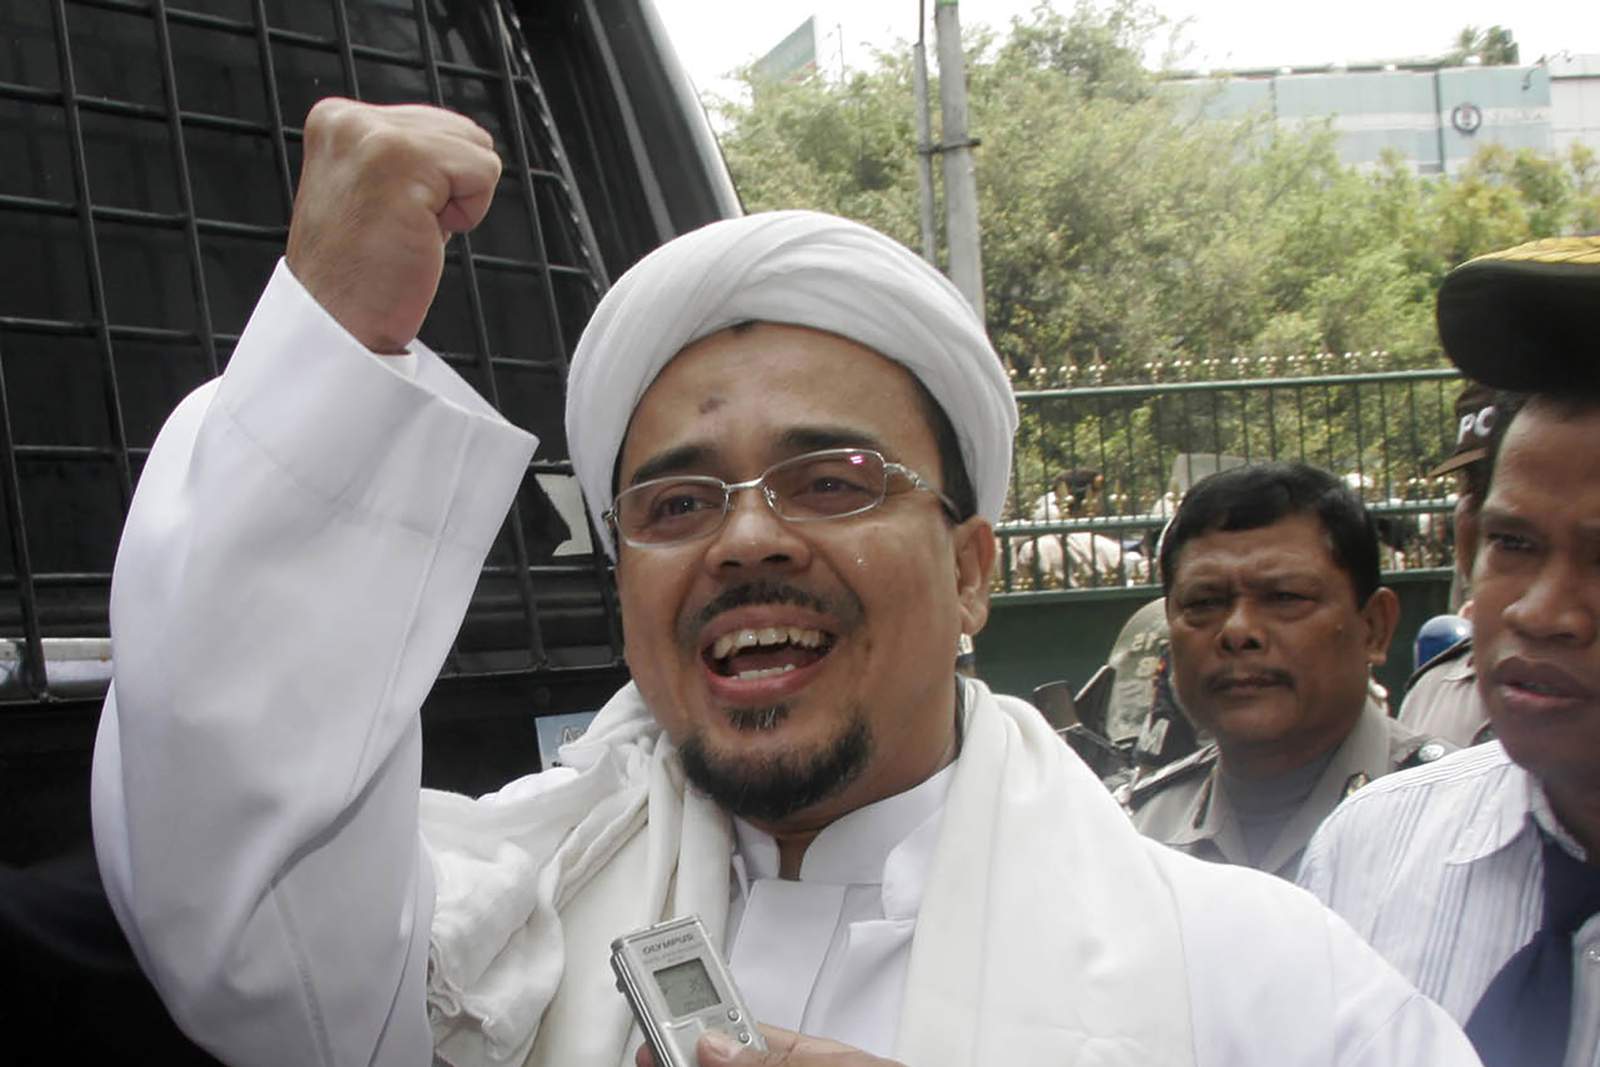 Firebrand Indonesian cleric returns from 3-year Saudi exile